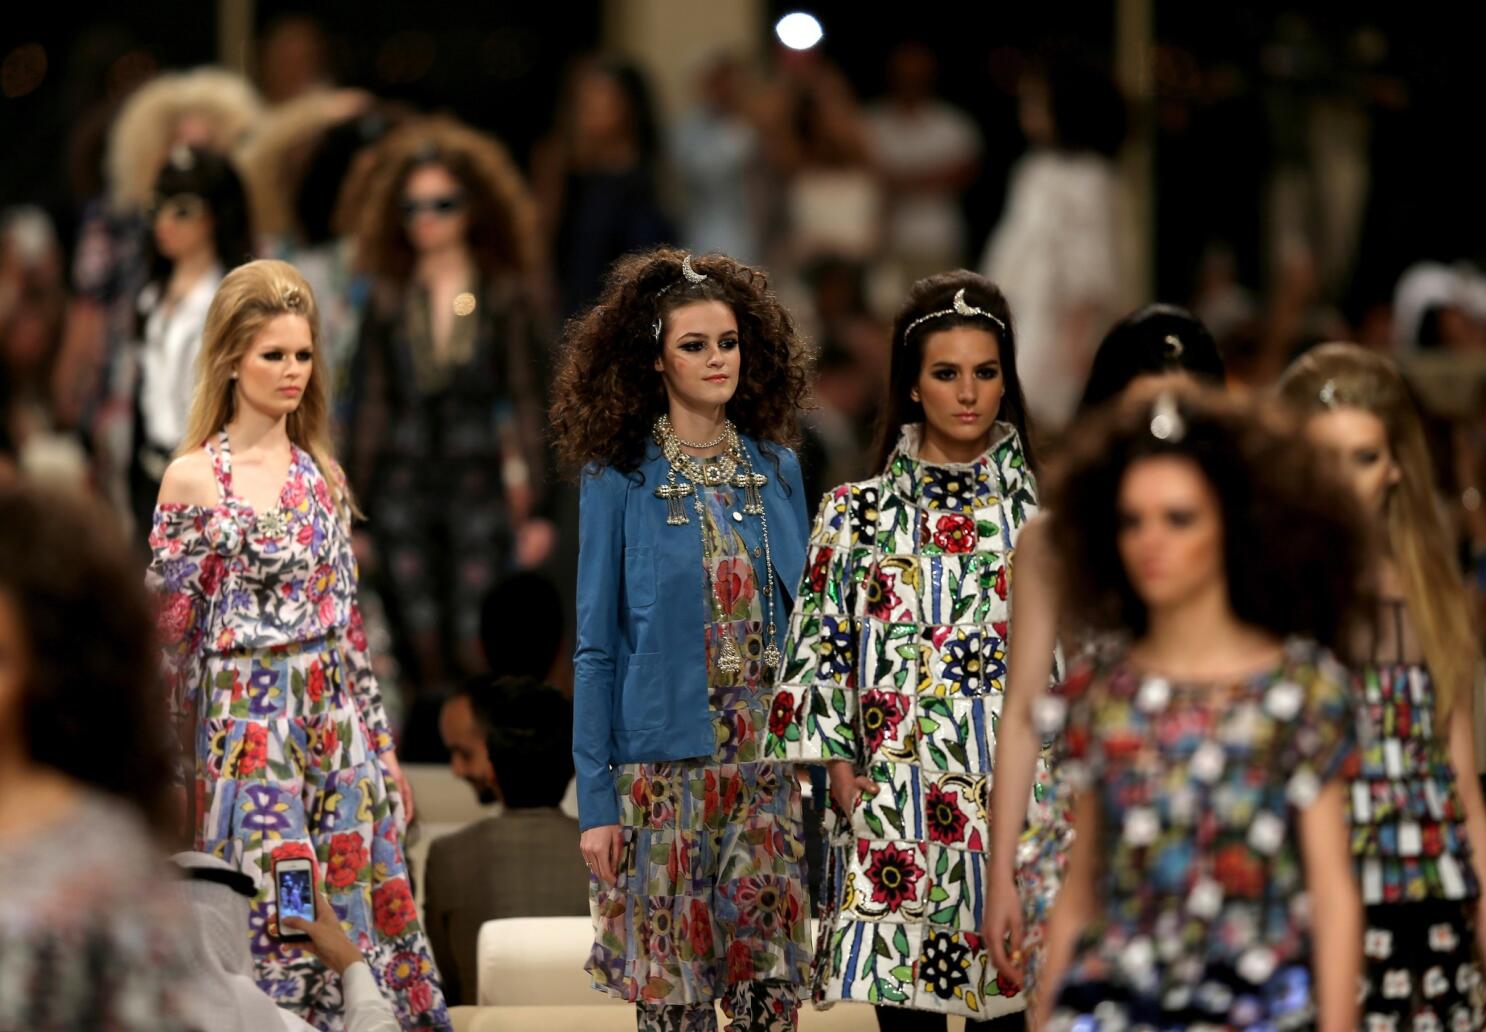 Chanel 2014/2015 cruise collection unveiled in Dubai - Los Angeles